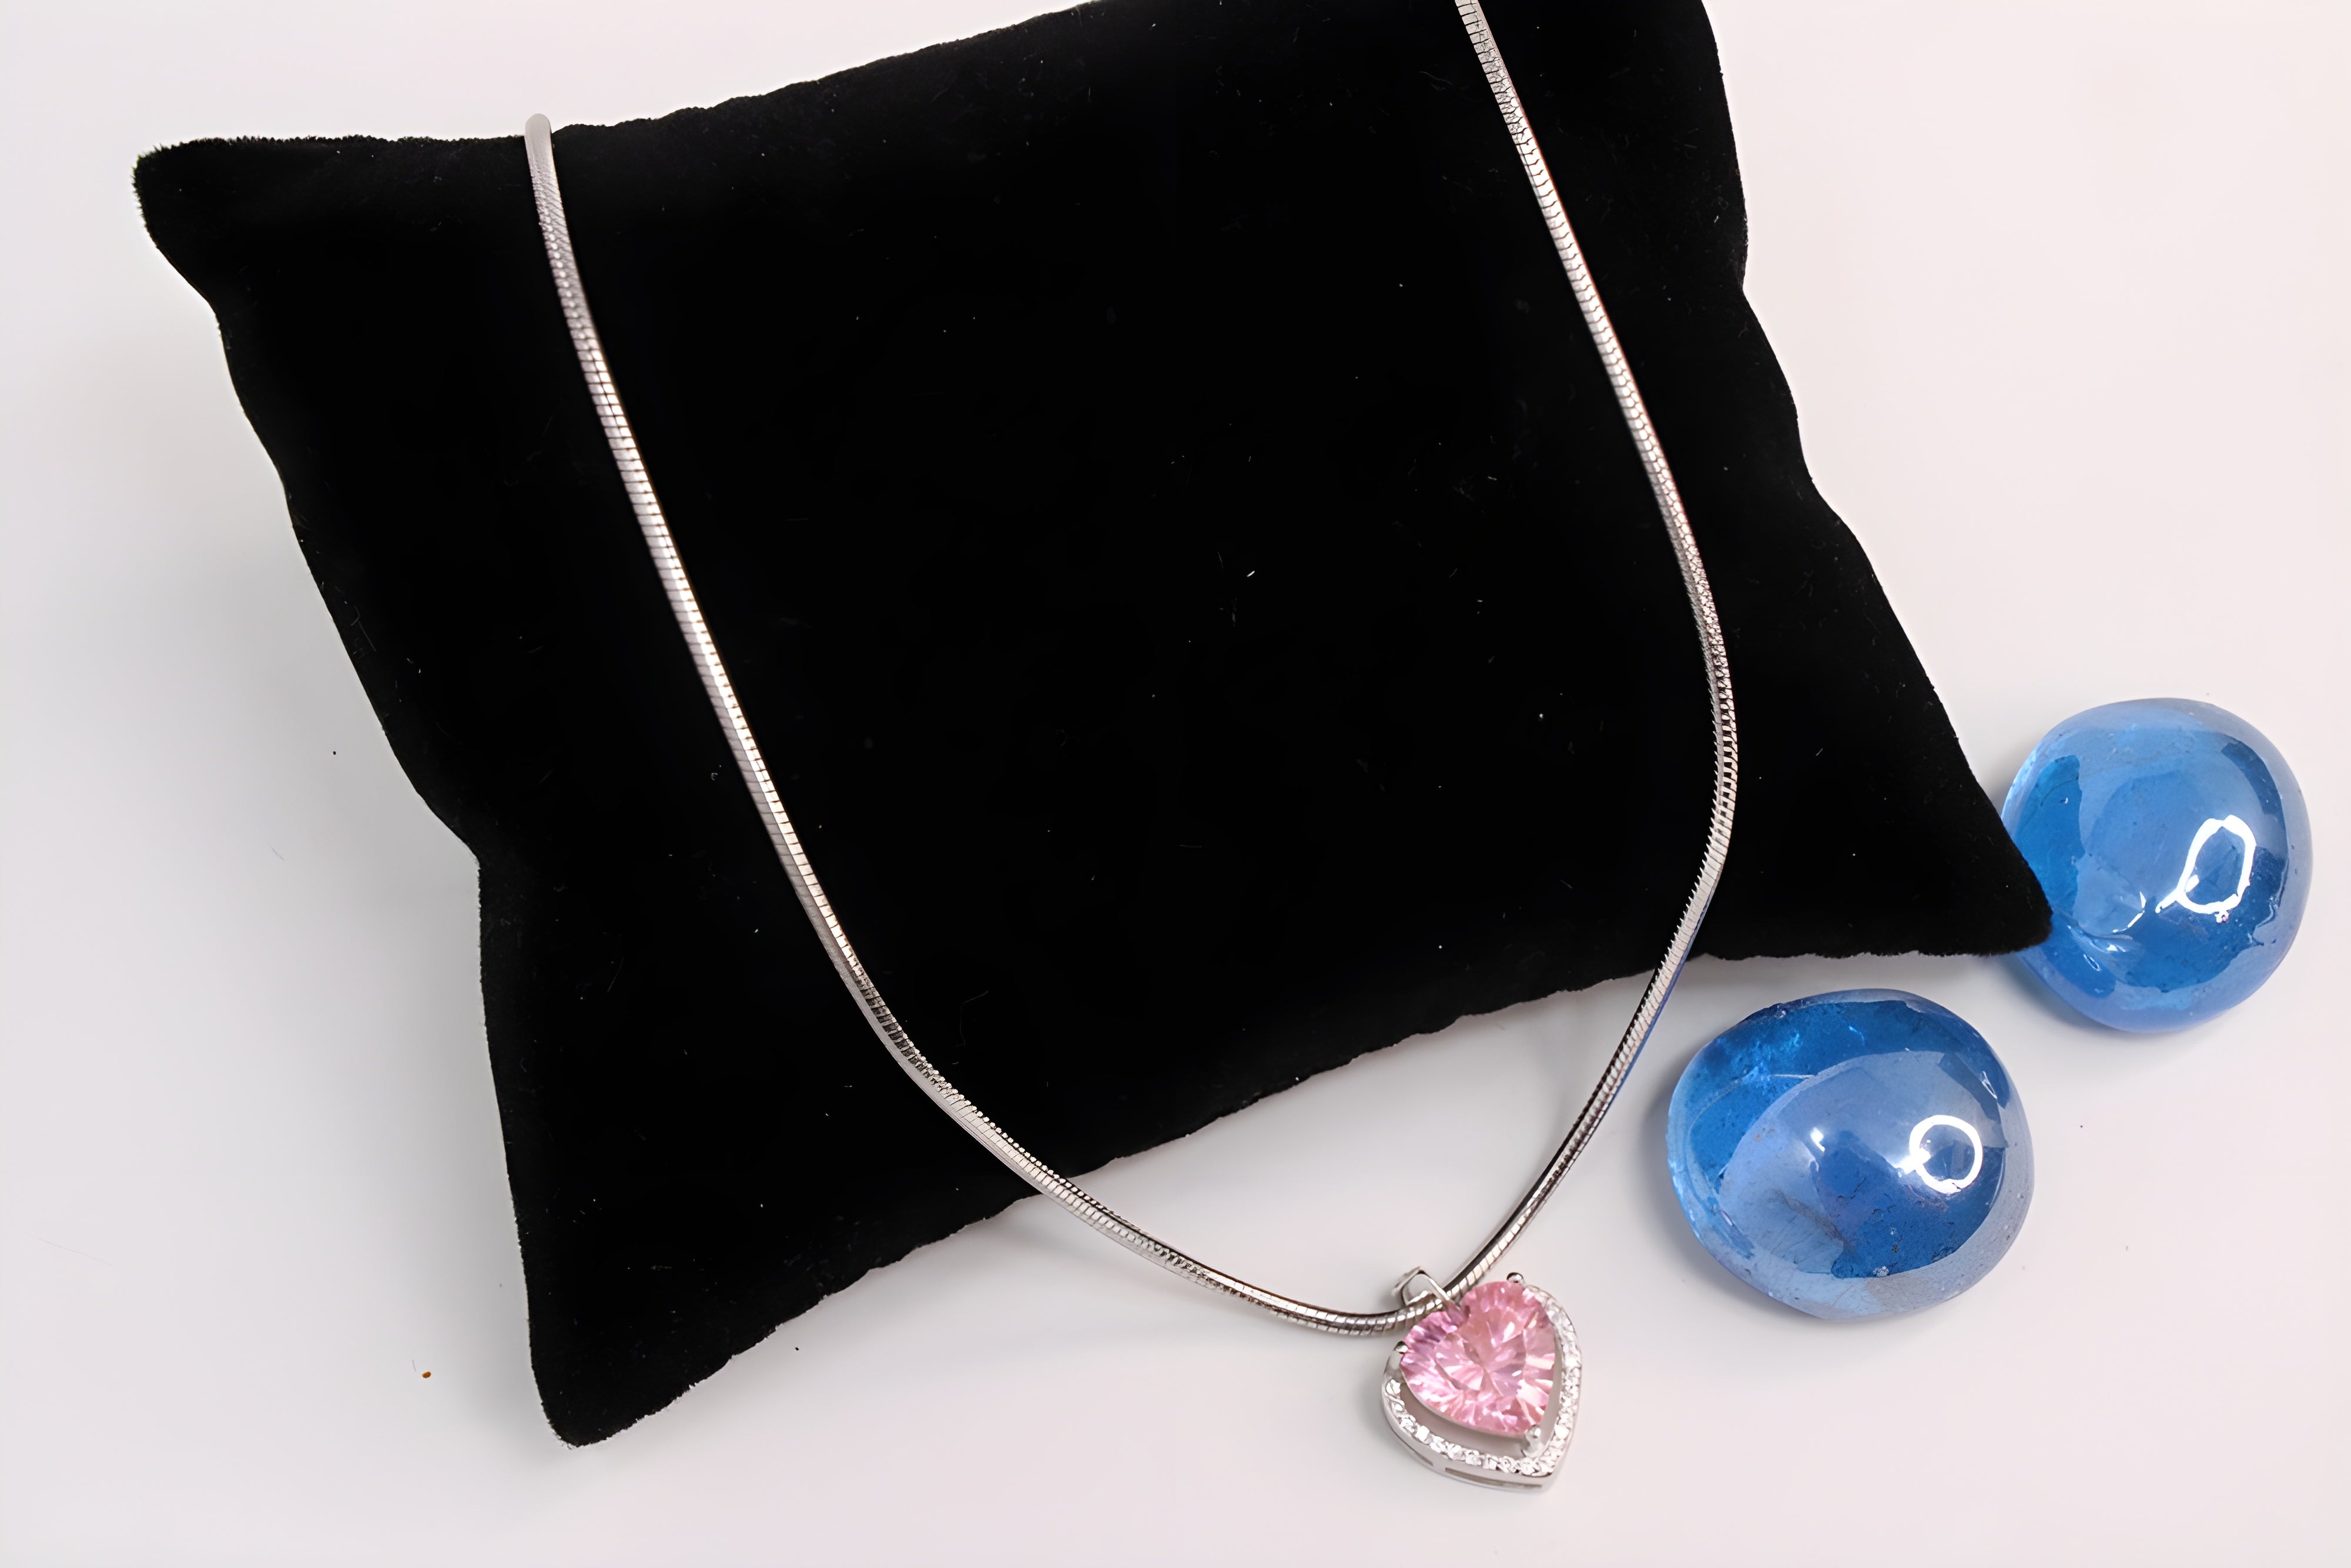 Heart-Shaped Pendant in 92.5 Sterling Silver with Swarovski Crystals